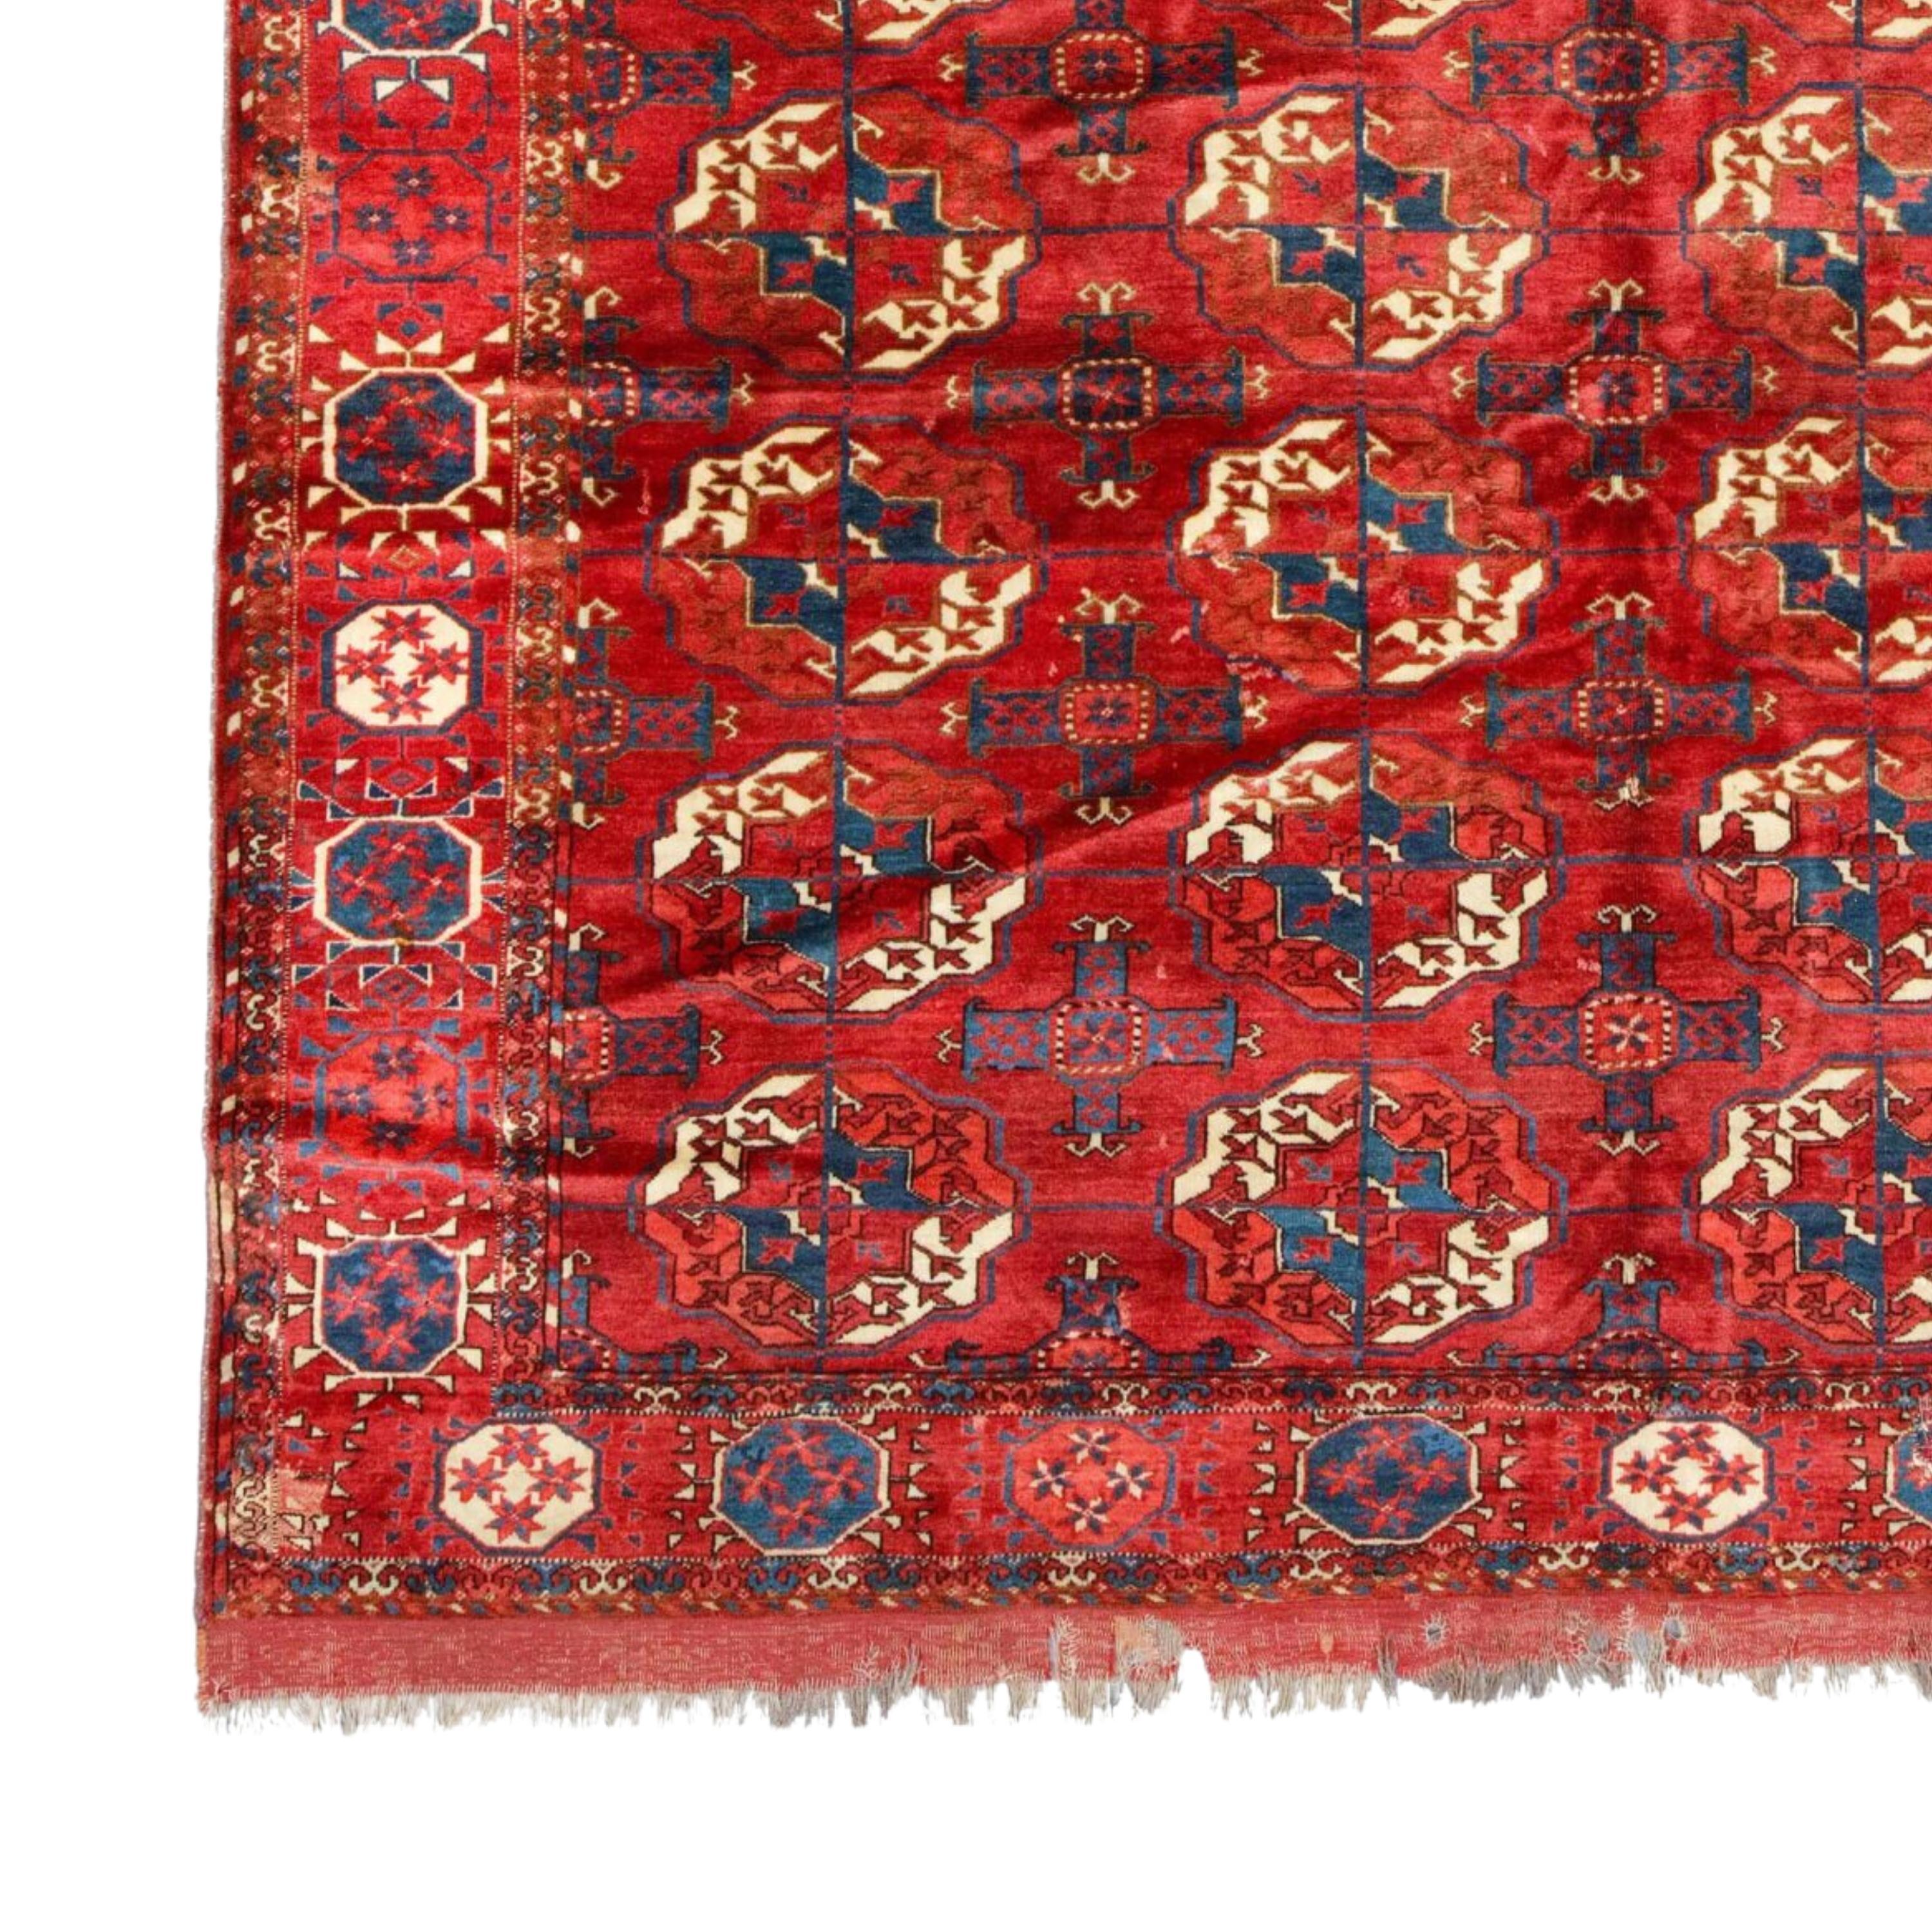 Middle of 19th Century Central Asia Turkmen Tekke Main Rug
Size 197 x 260 cm

Own this magnificent 19th century Turkmen Tekke Main carpet and step into a world where history and art meet. Each thread that makes up this masterpiece weaves a story of